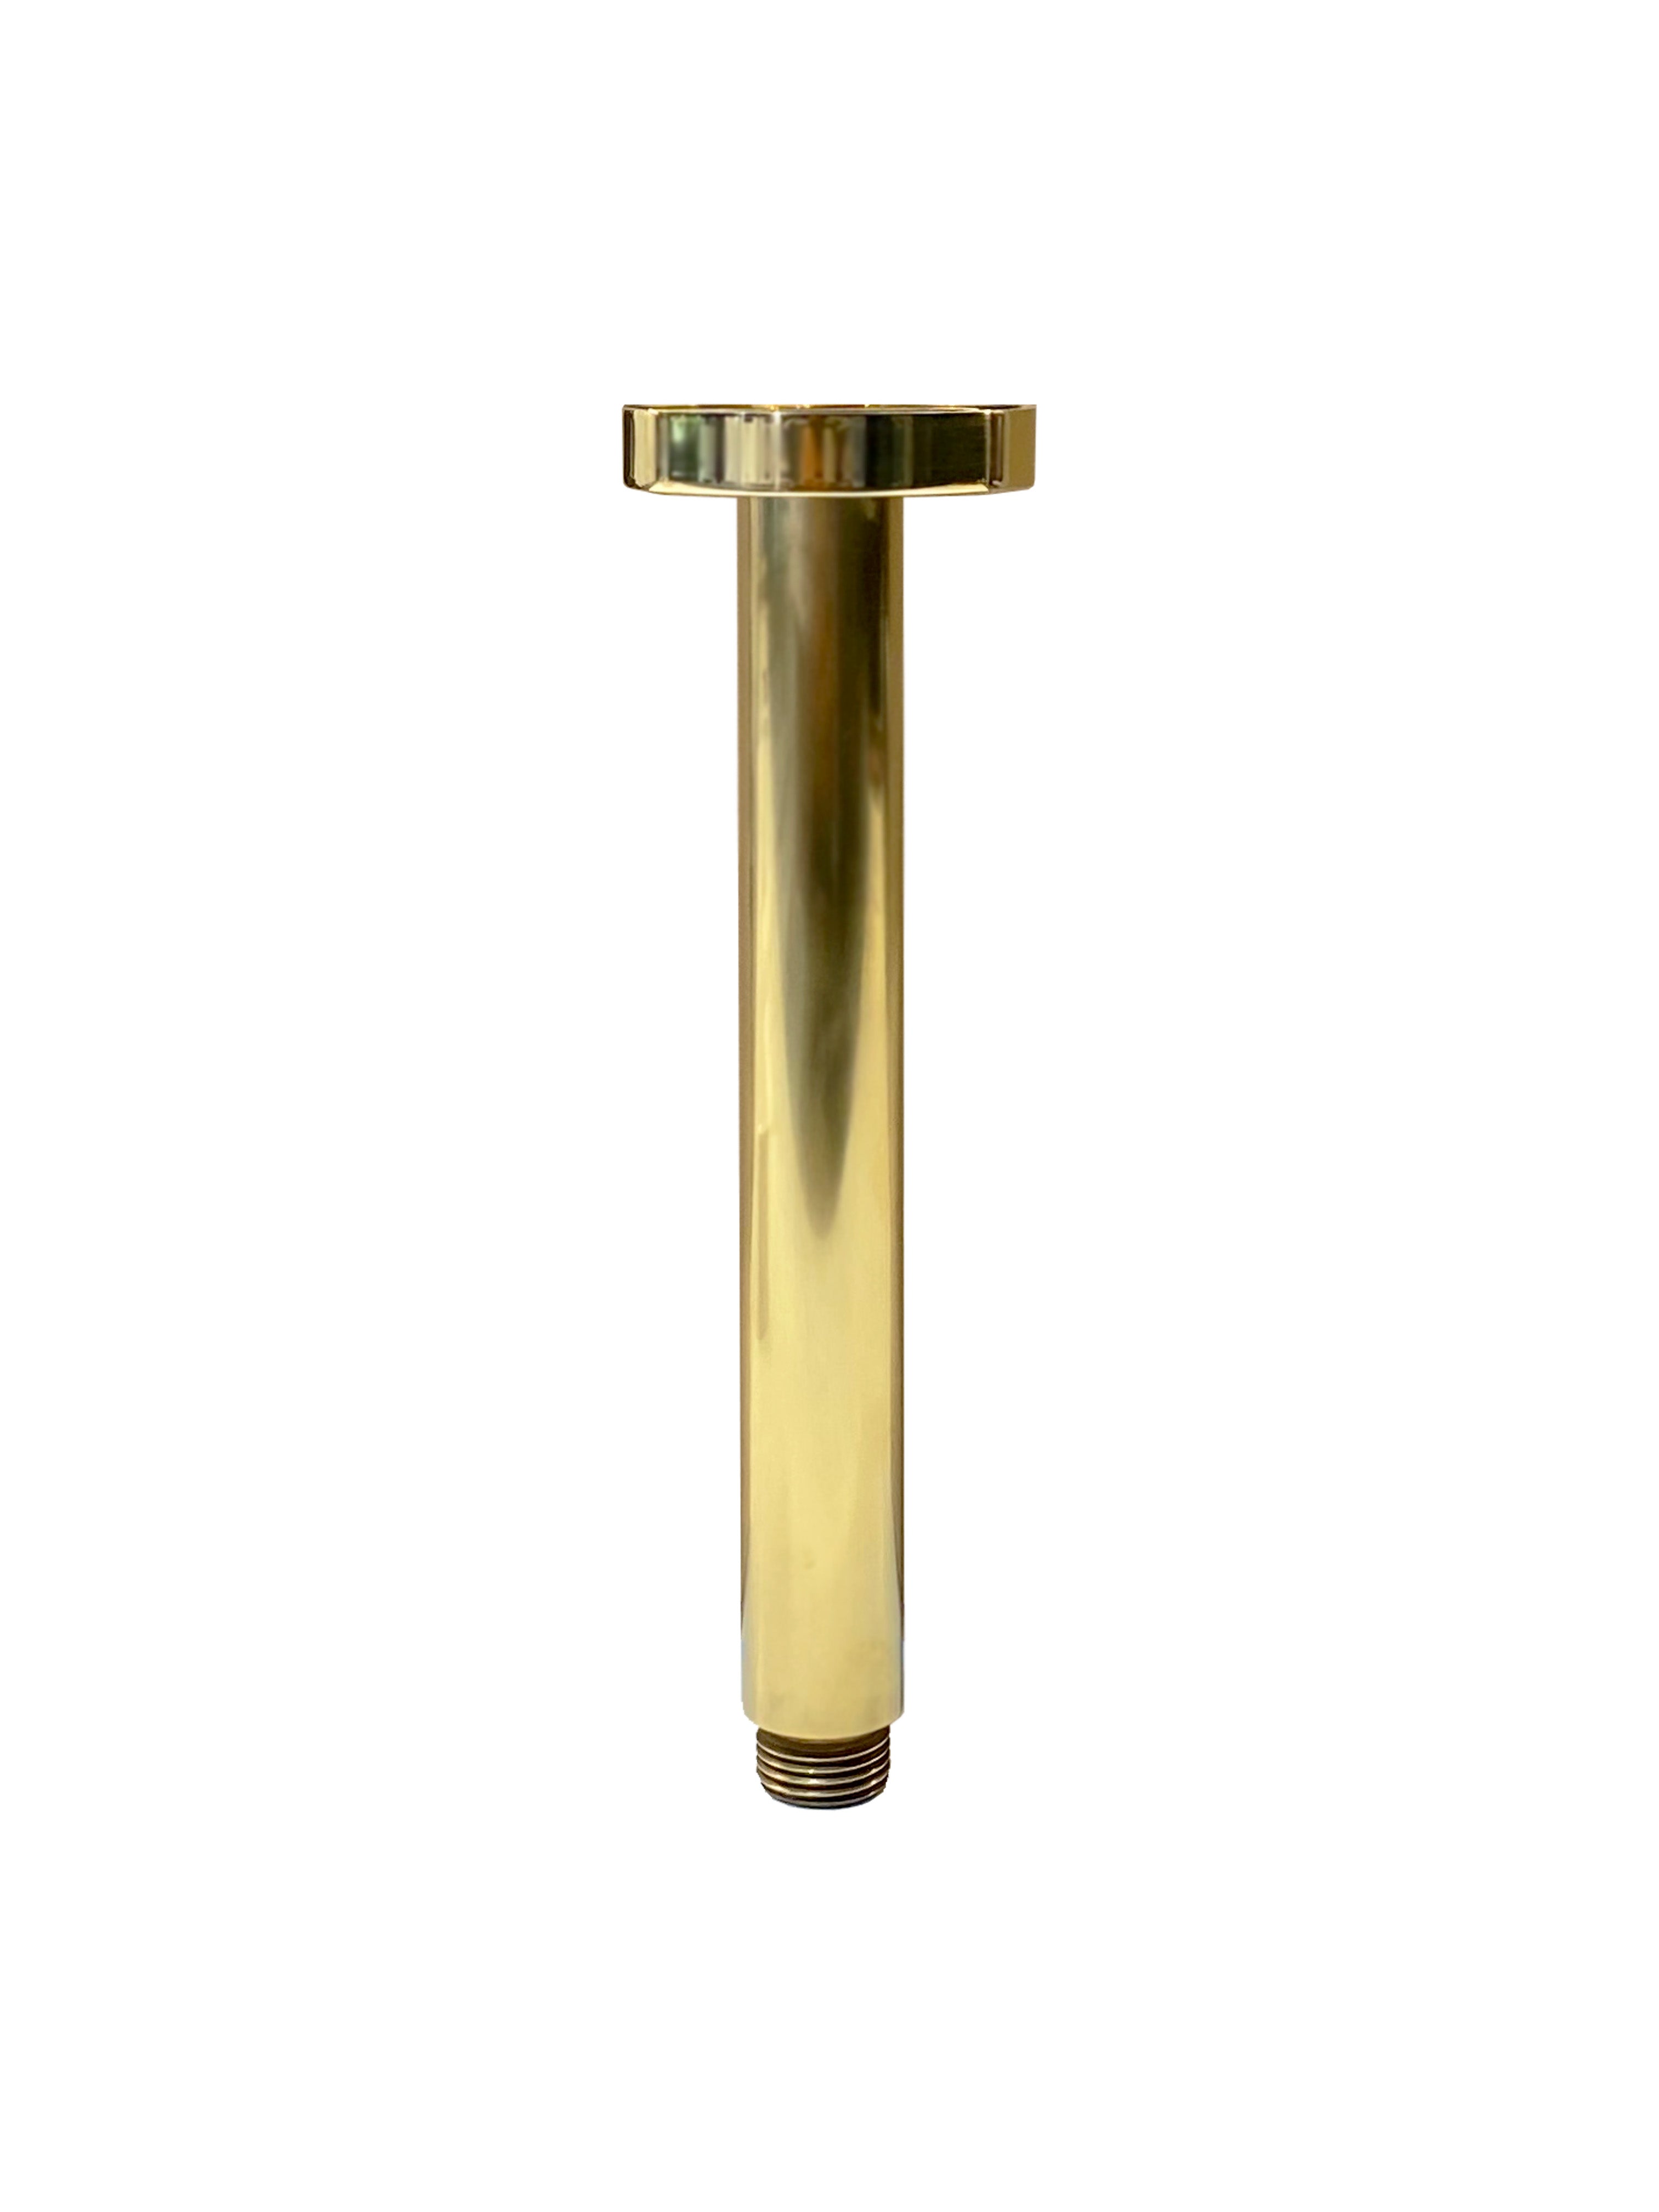 Daintree Ceiling Mounted Shower Arm Round 200mm in Raw Brass